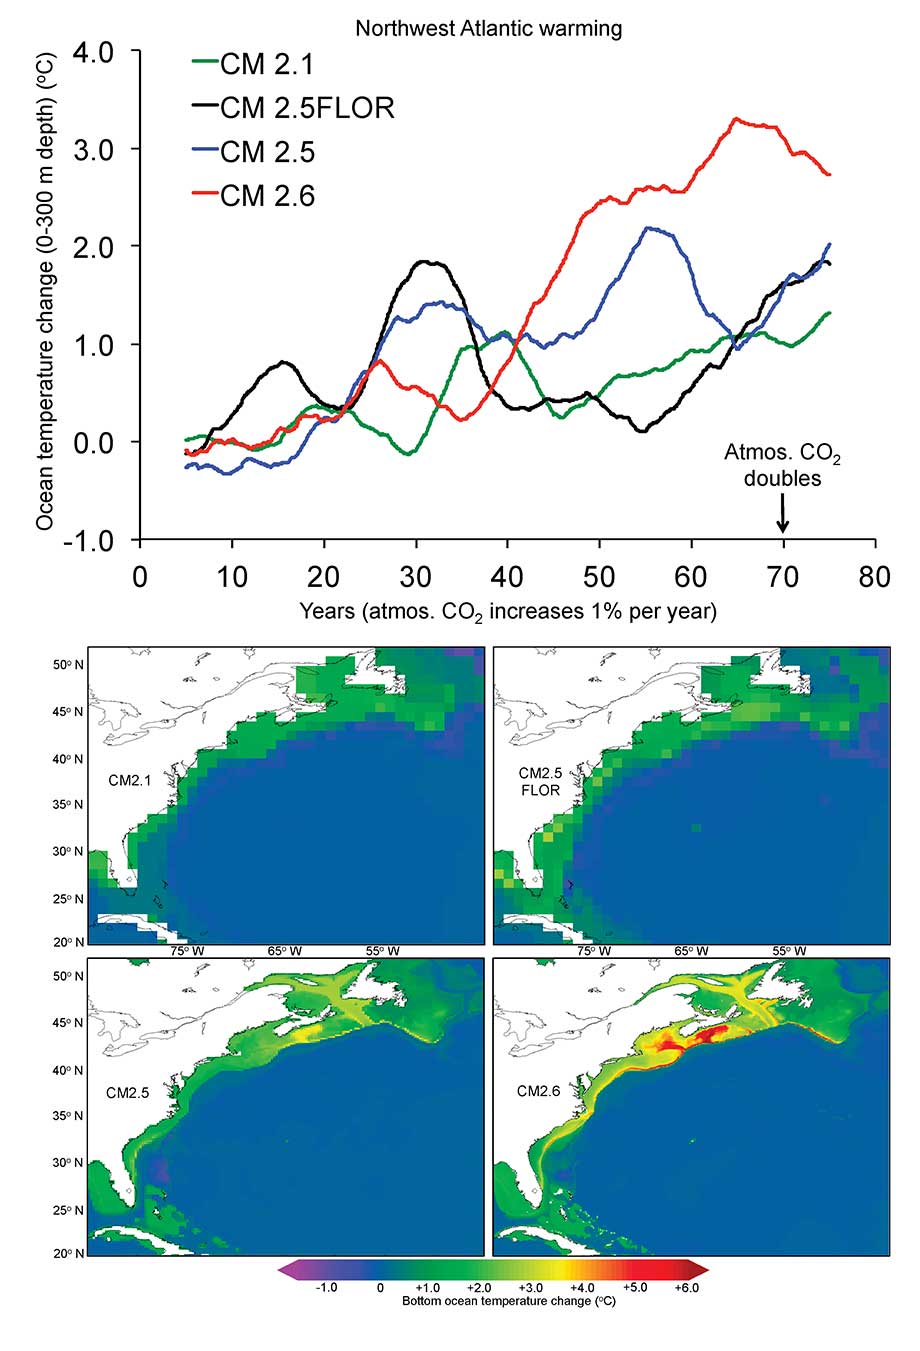 Northwest Atlantic upper-ocean (0-300 m) and bottom temperature change after a doubling of global atmospheric CO2 among four GFDL climate models of varying ocean and atmosphere resolution.